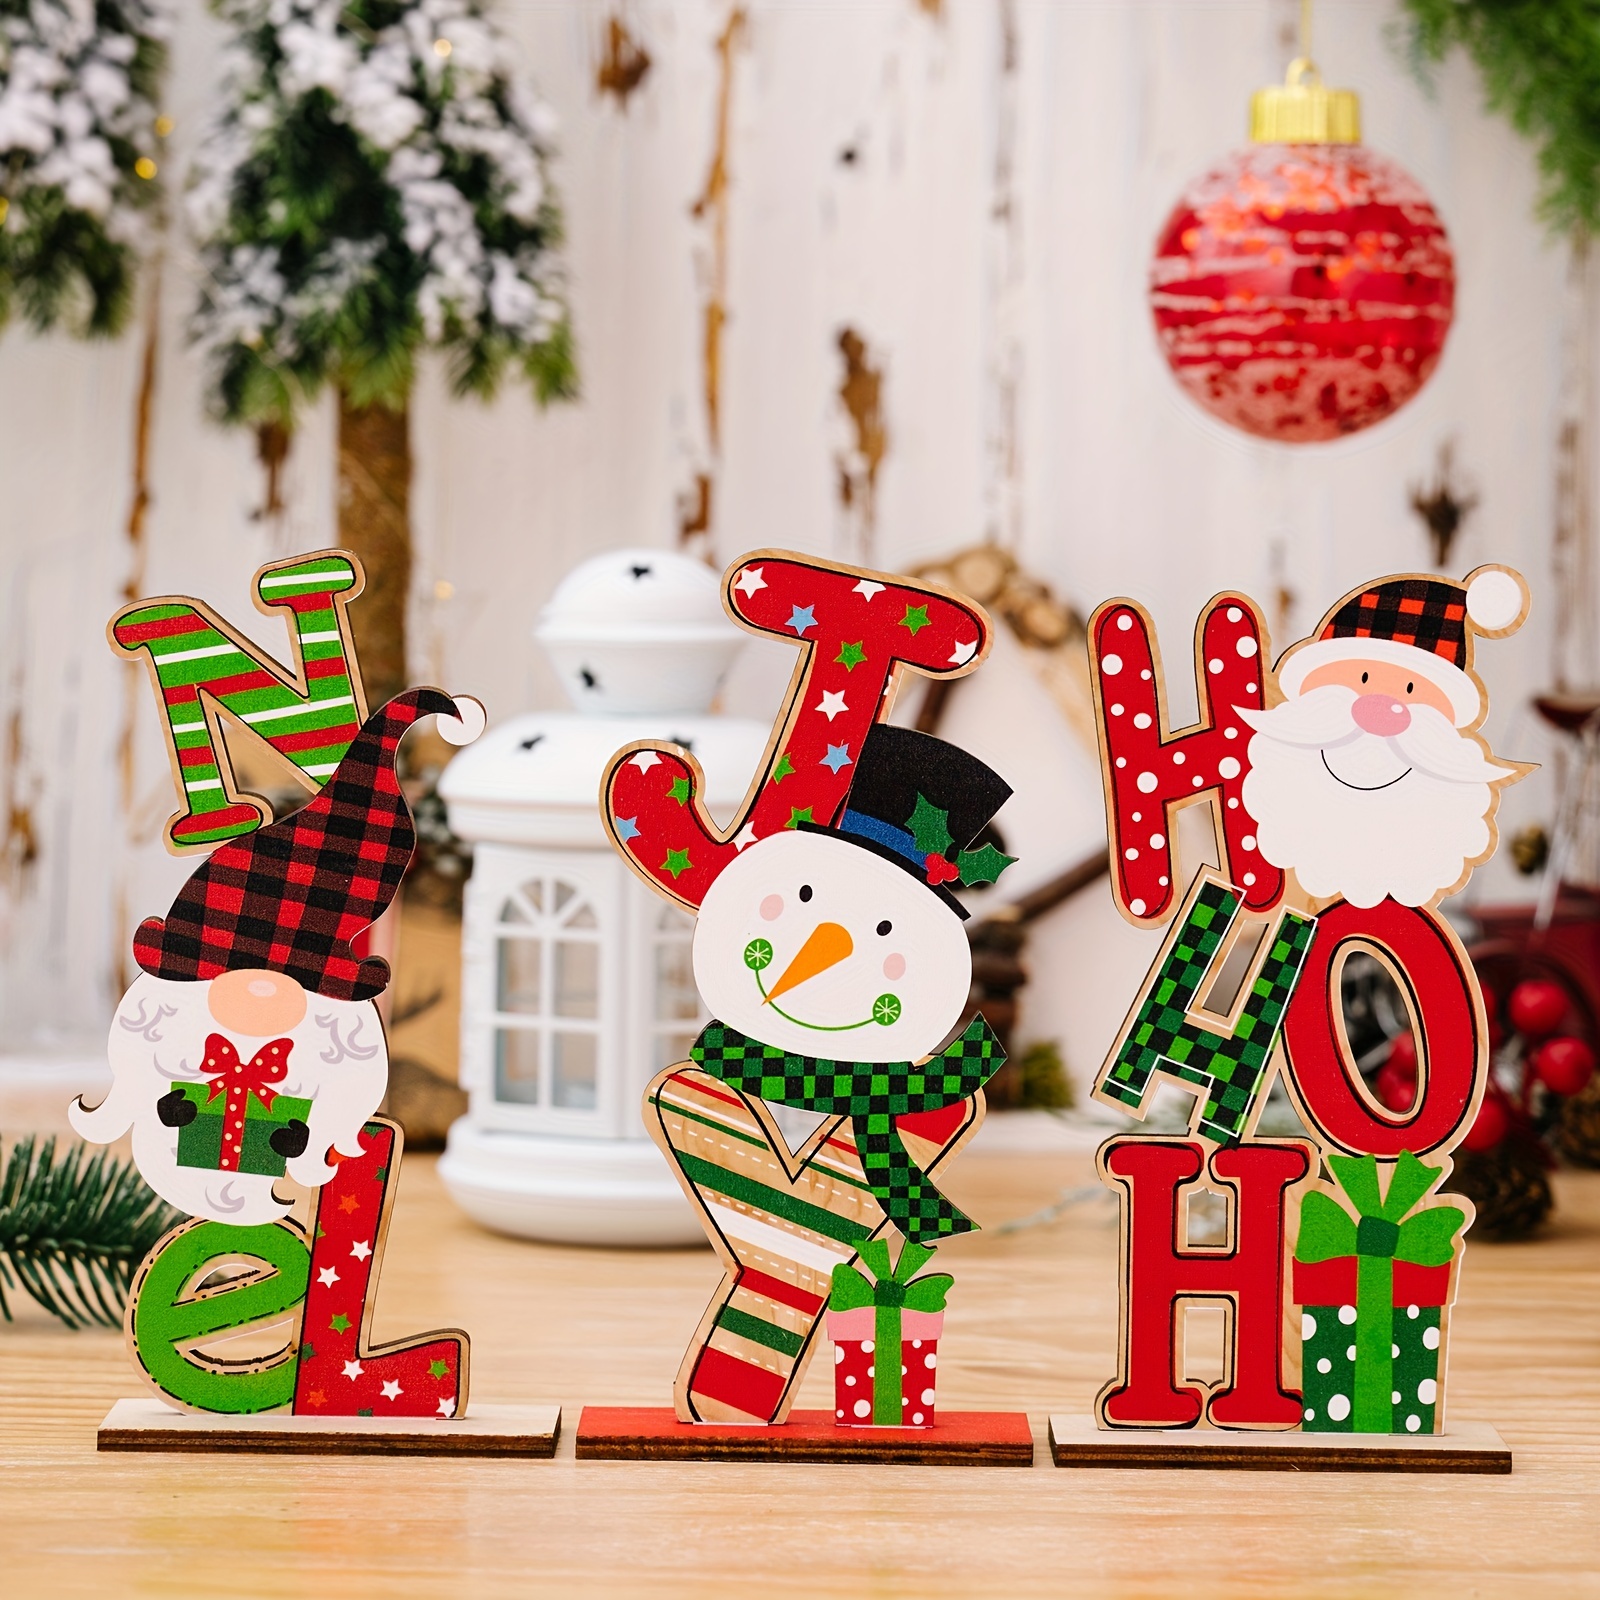 Christmas Gifts for The Home - Home Decor Gifts